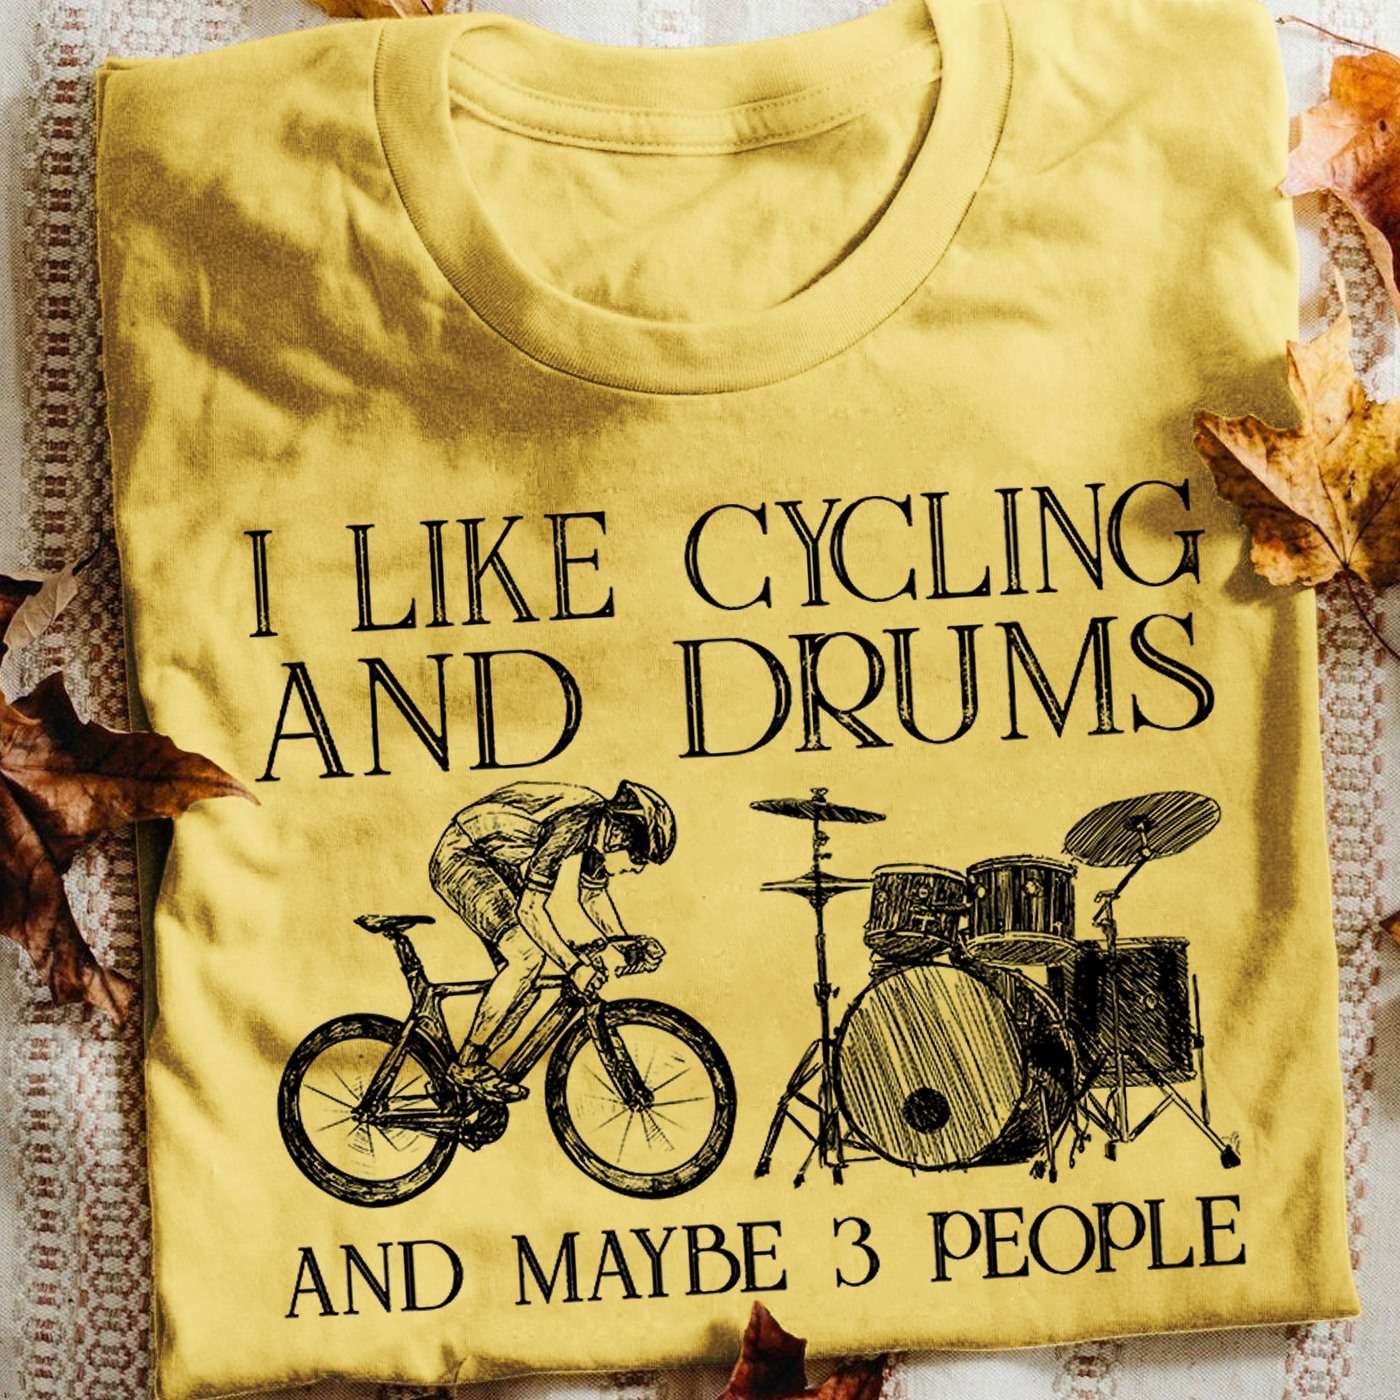 I like cycling and drums and maybe 3 people - Man cycling